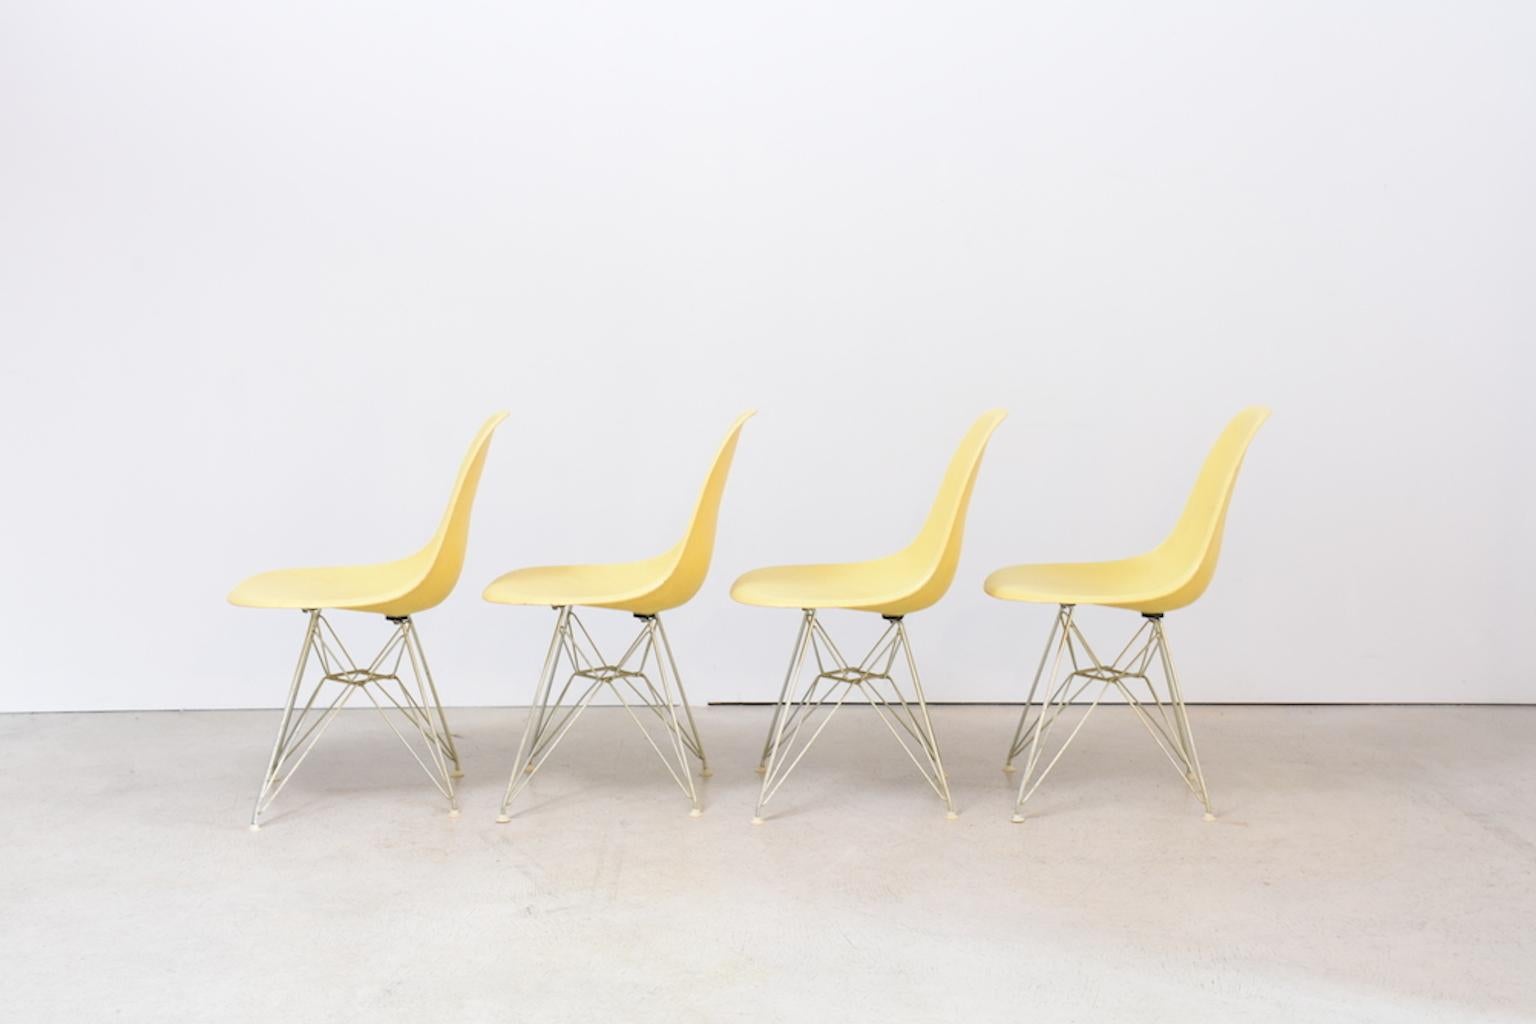 Set of 4 iconic DSW Dining Chairs by Charles & Ray Eames for Herman Miller in washed out yellow. Early edition in Zenith with Eiffel Legs. All four chairs are in good condition, each one is signed with Herman Miller patent label.
 